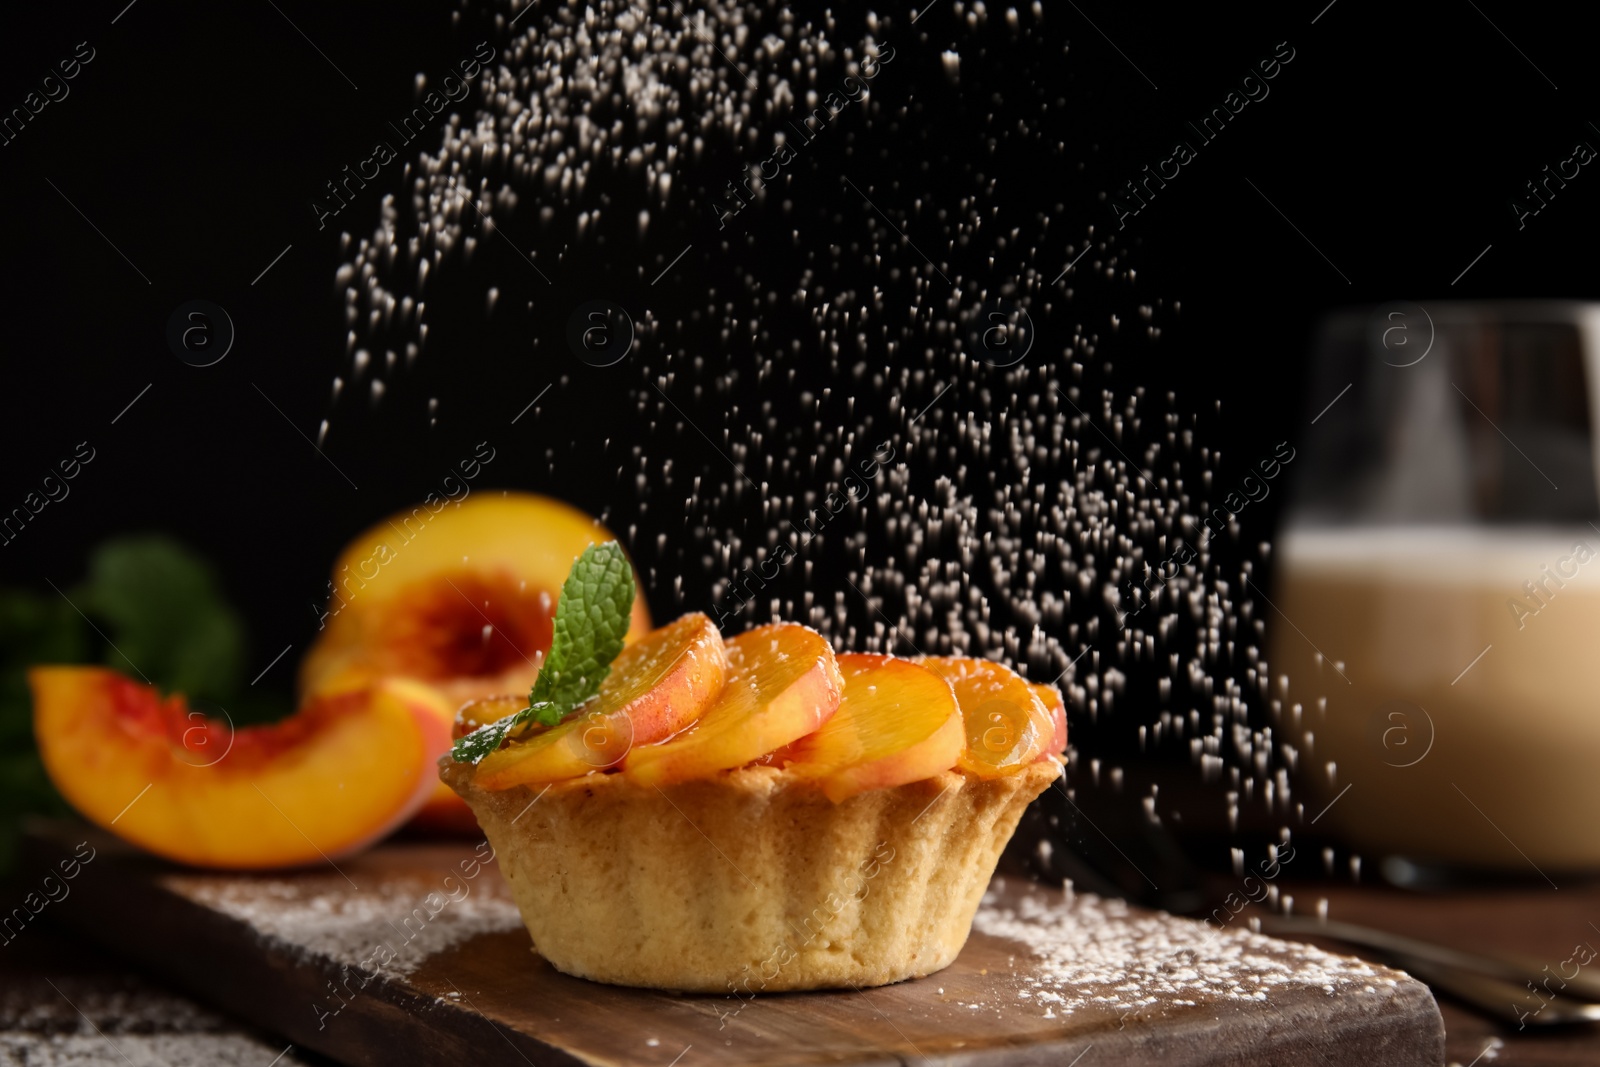 Photo of Decorating delicious peach dessert with powdered sugar on wooden board